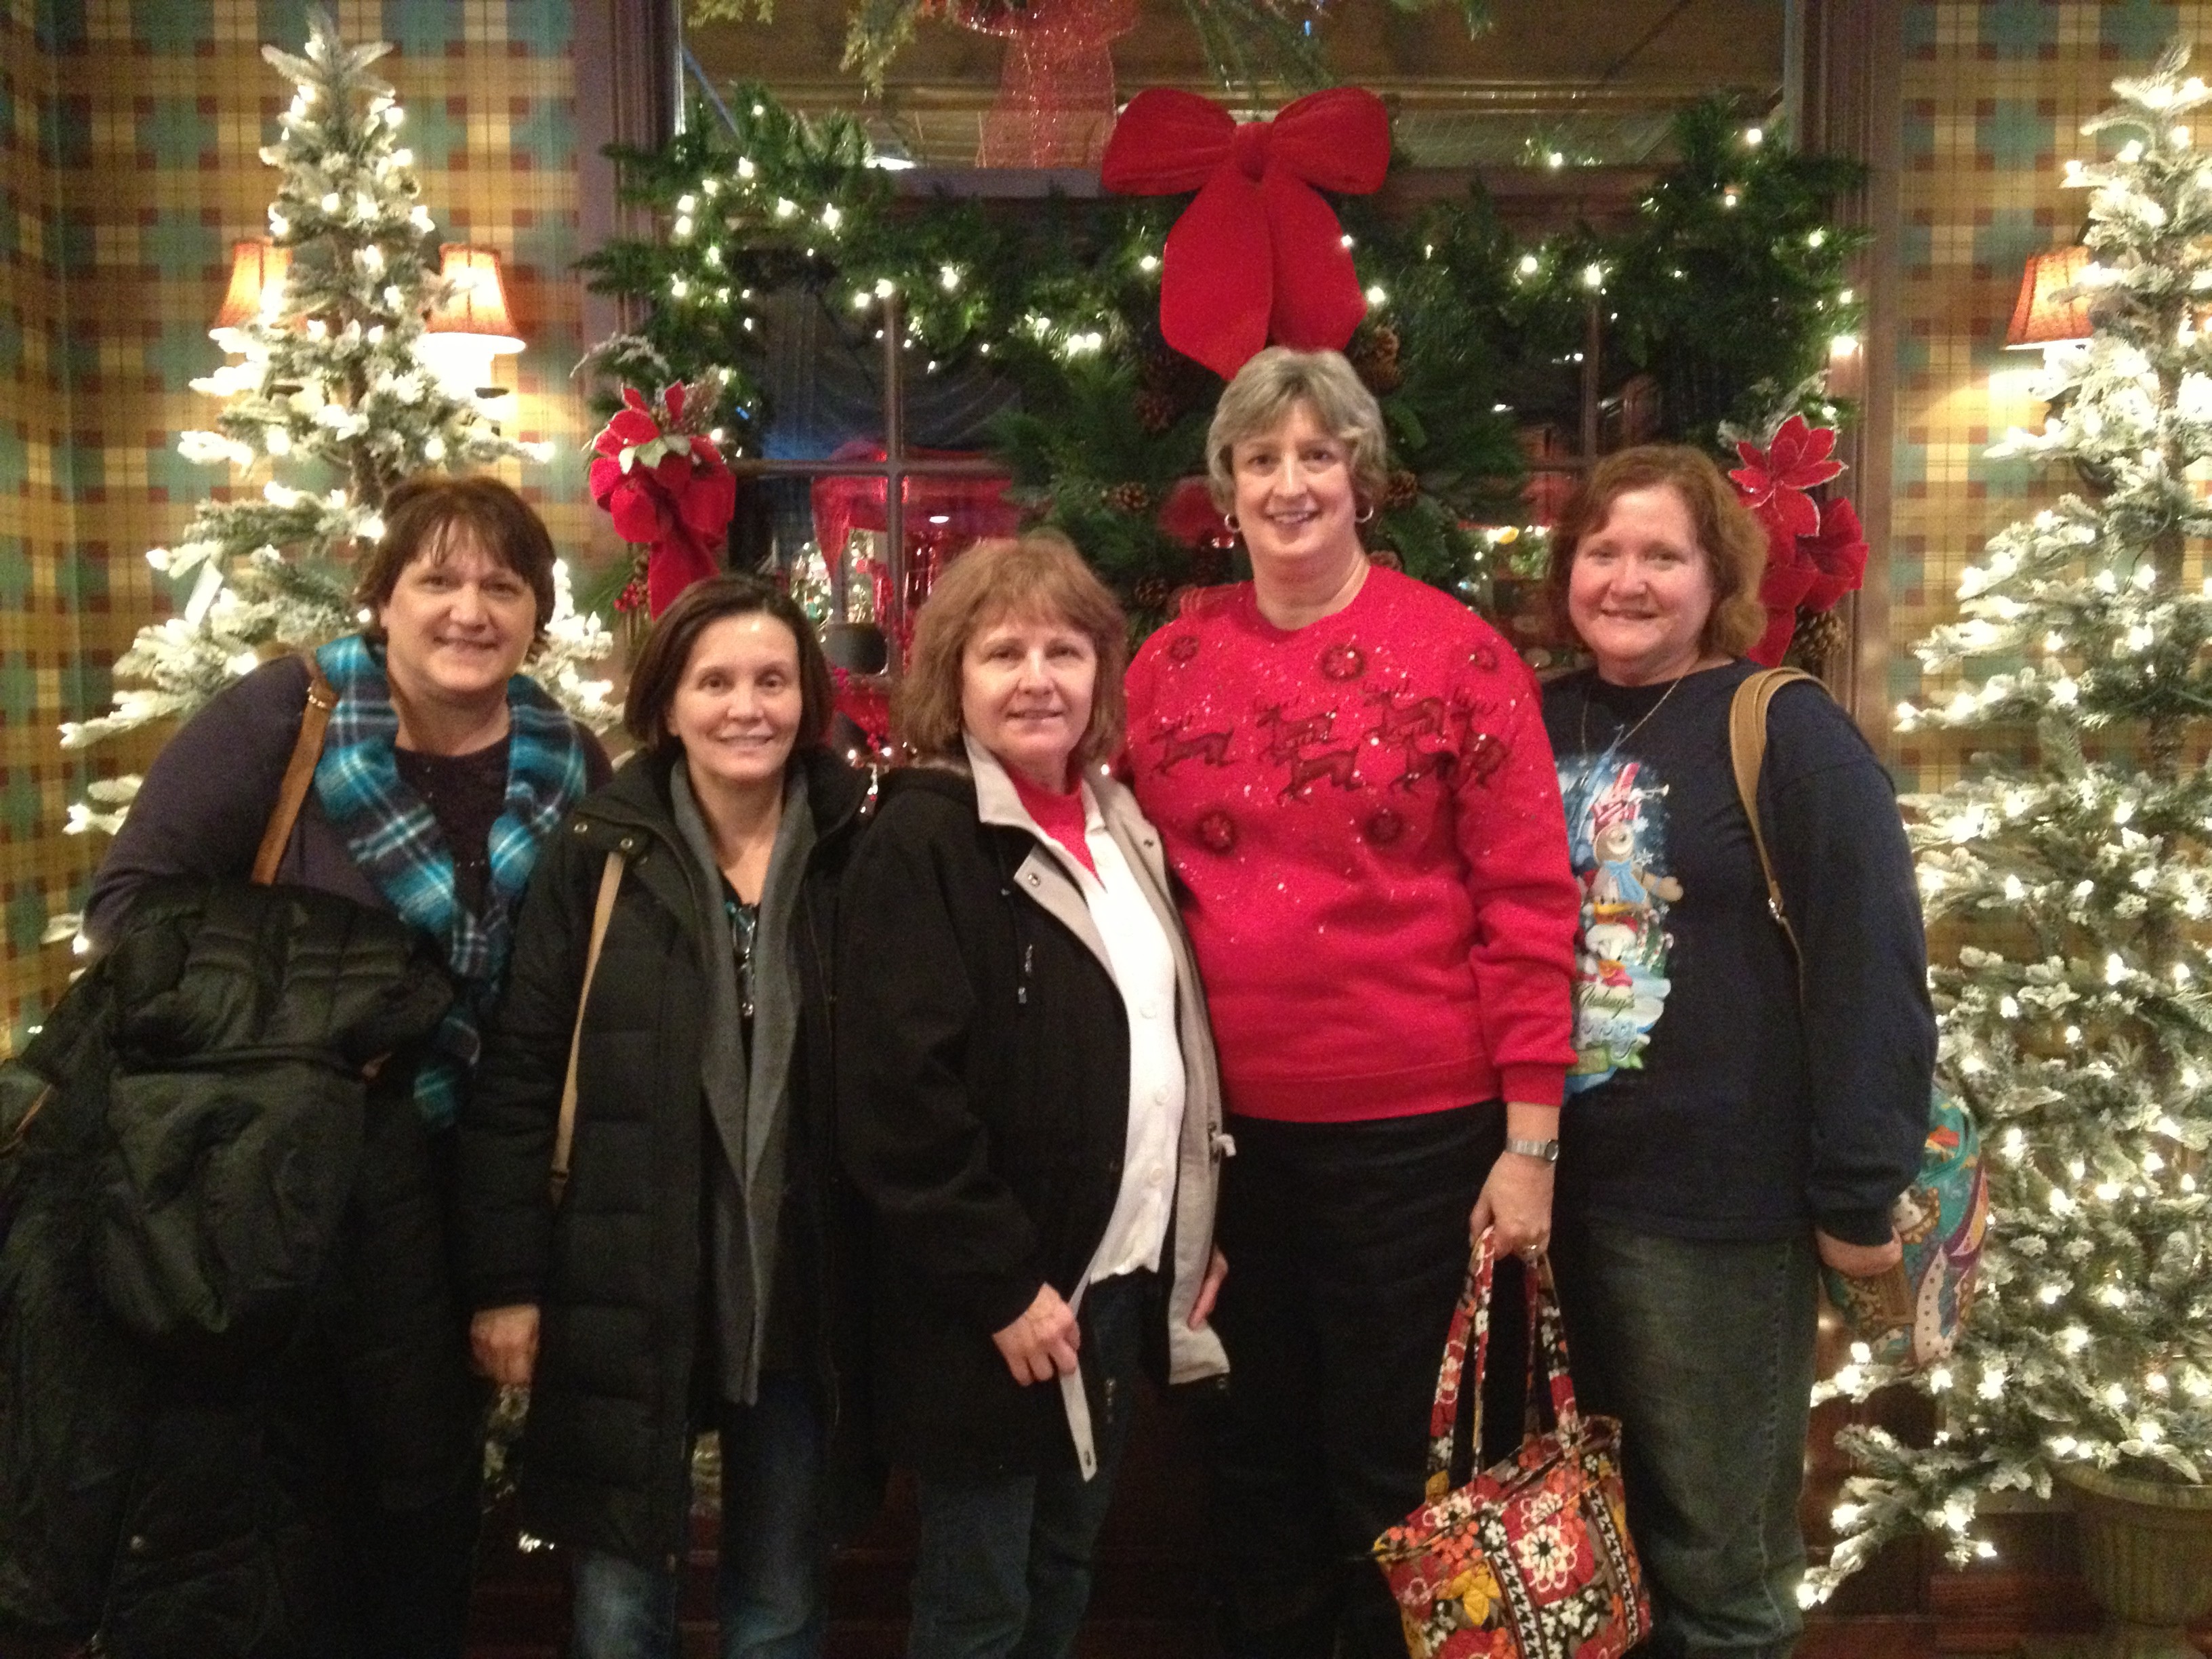 Pictured from L to R: Margie L, Selma, Alice F, Nancy B and Debbie R